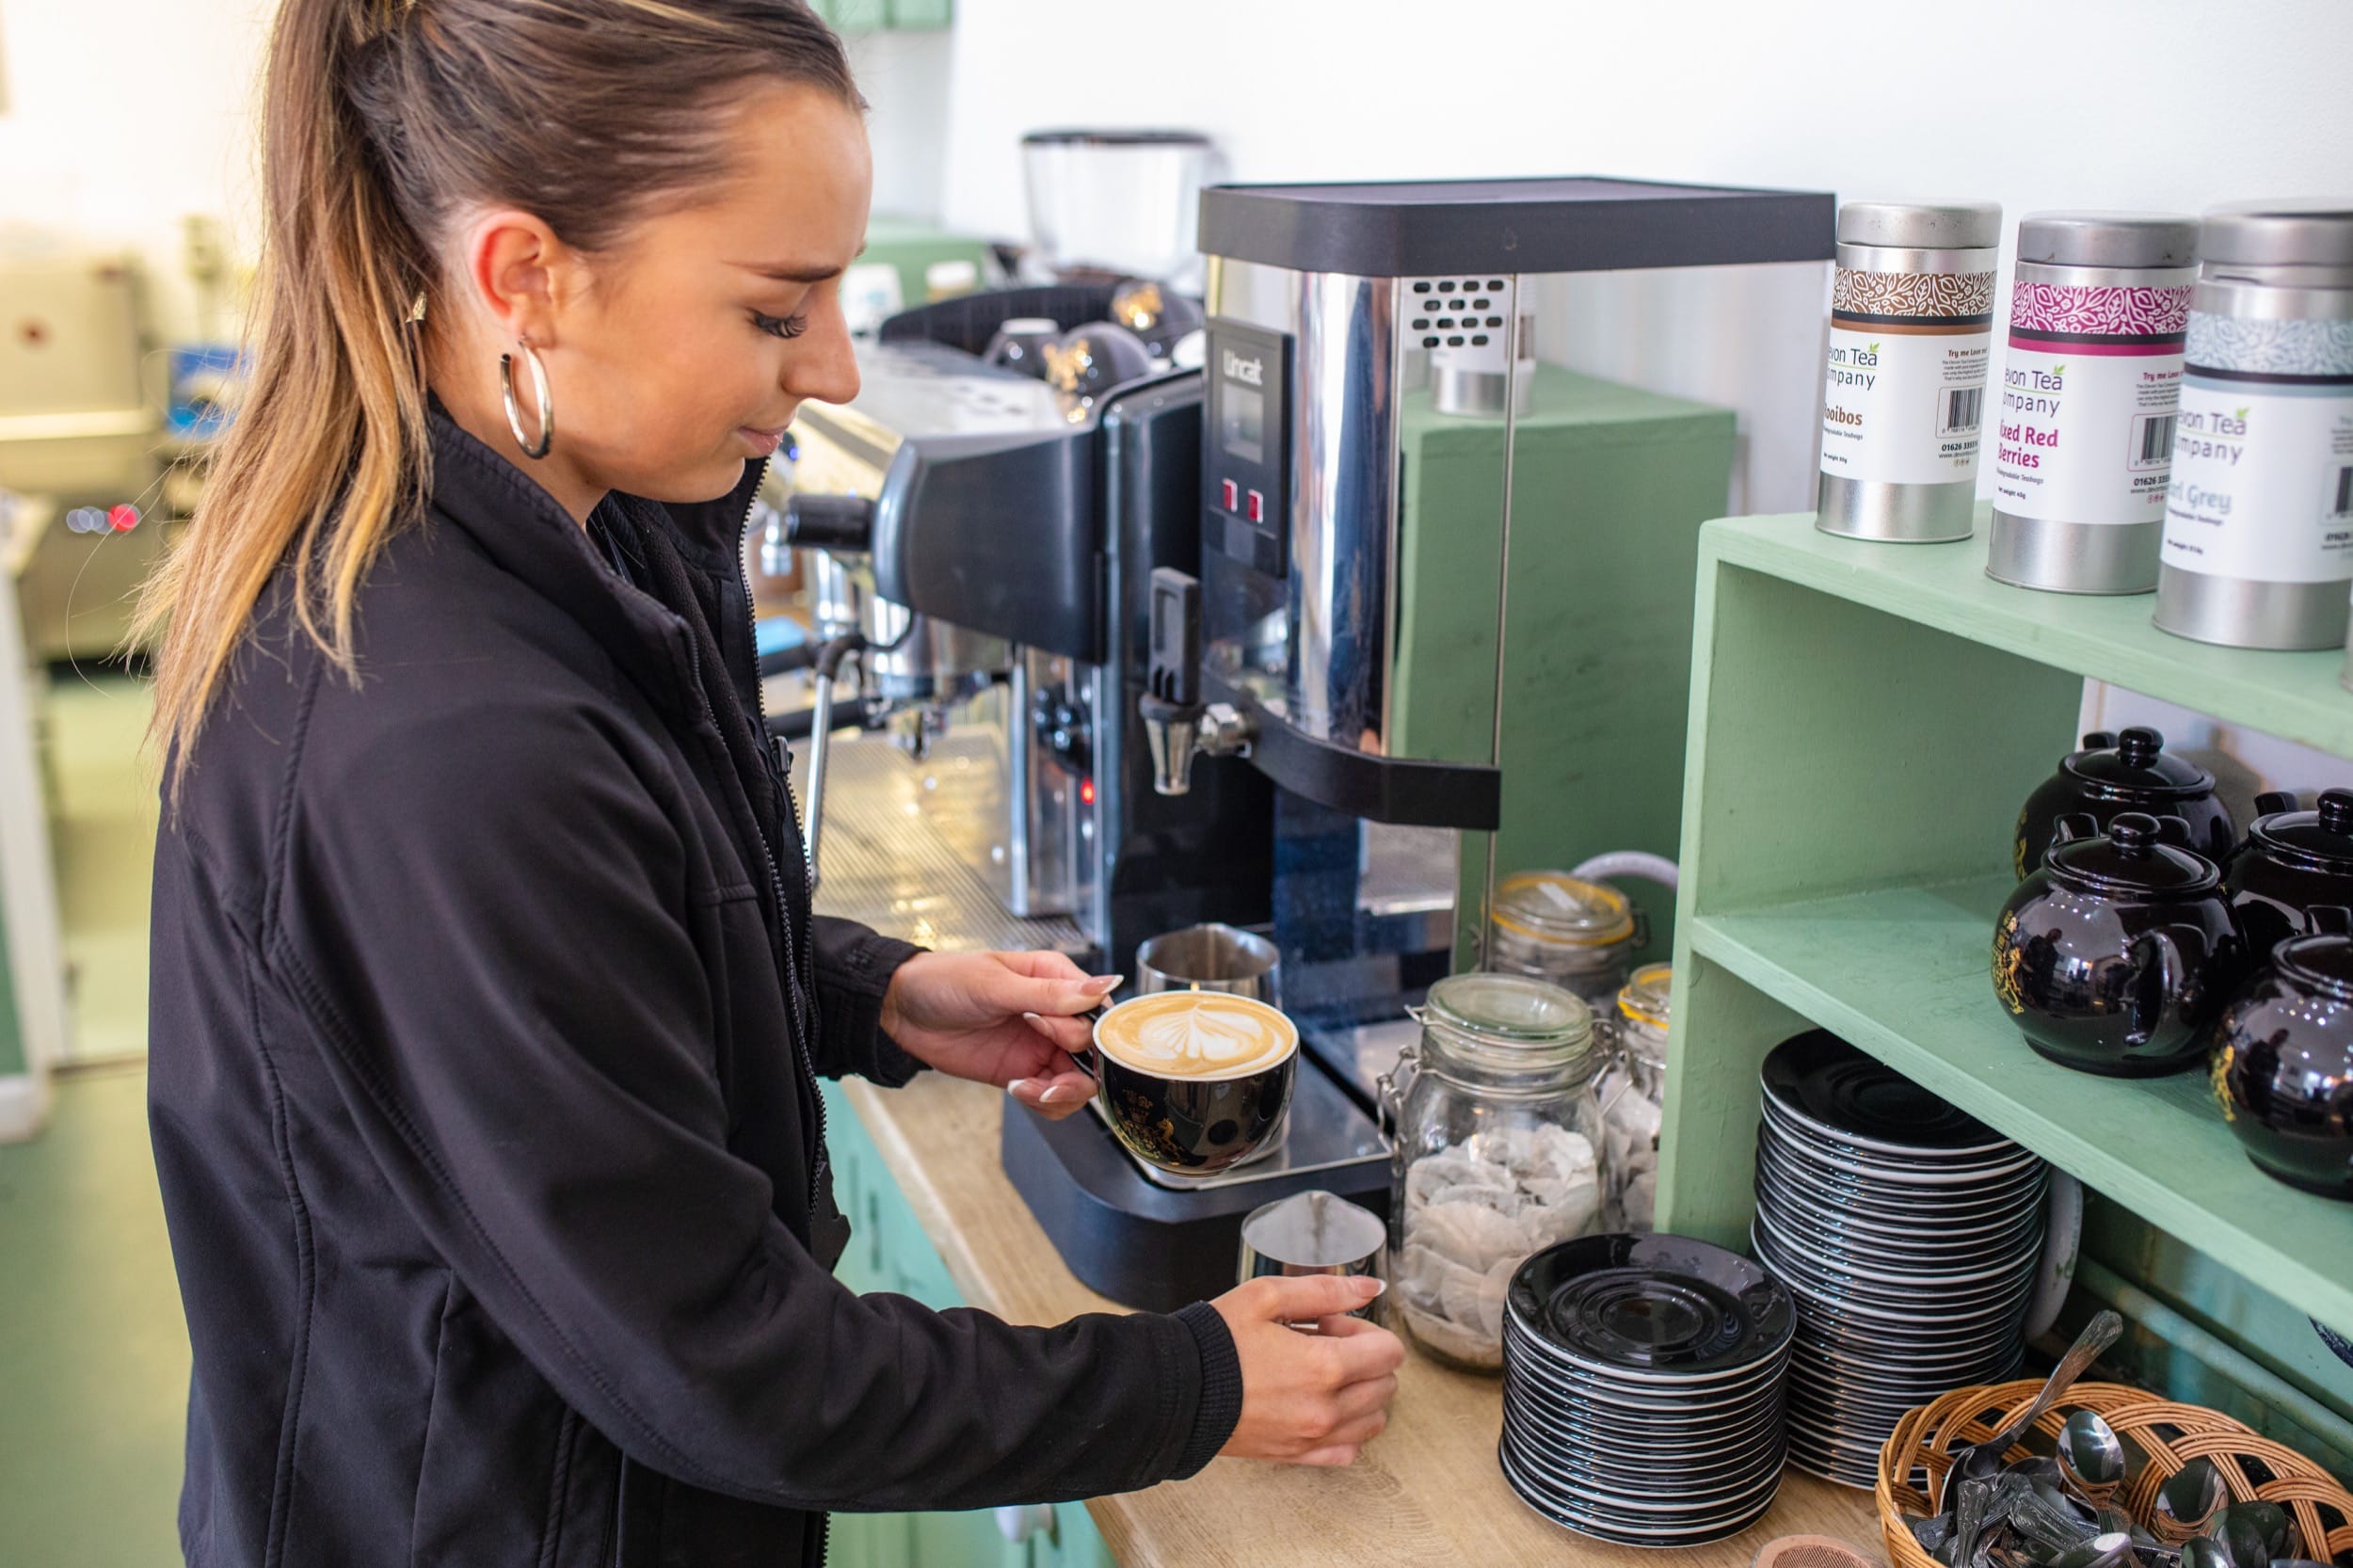 A woman prepares coffee for a customer